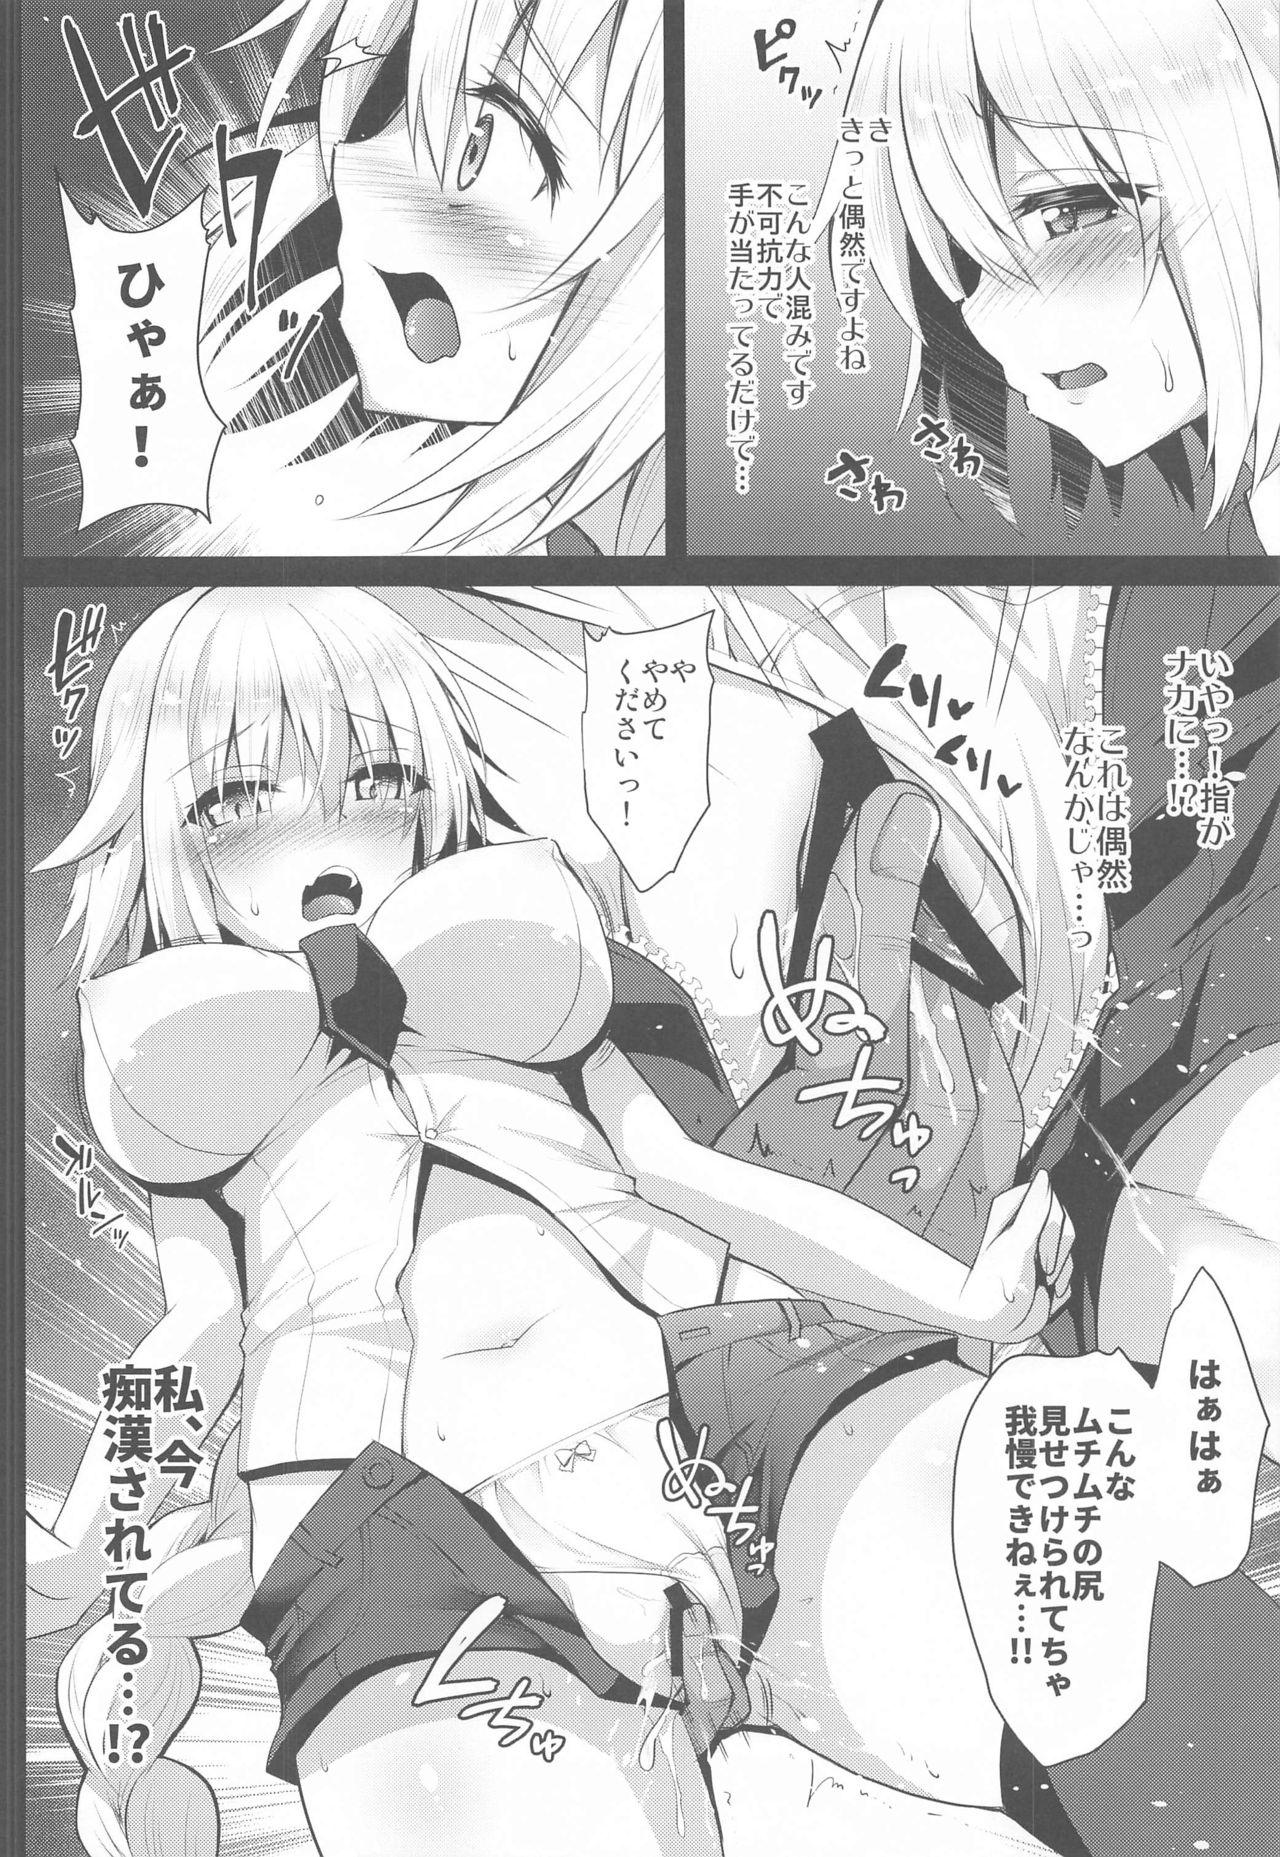 Hole Chikan Densha Jeanne - Fate grand order Reverse - Page 5